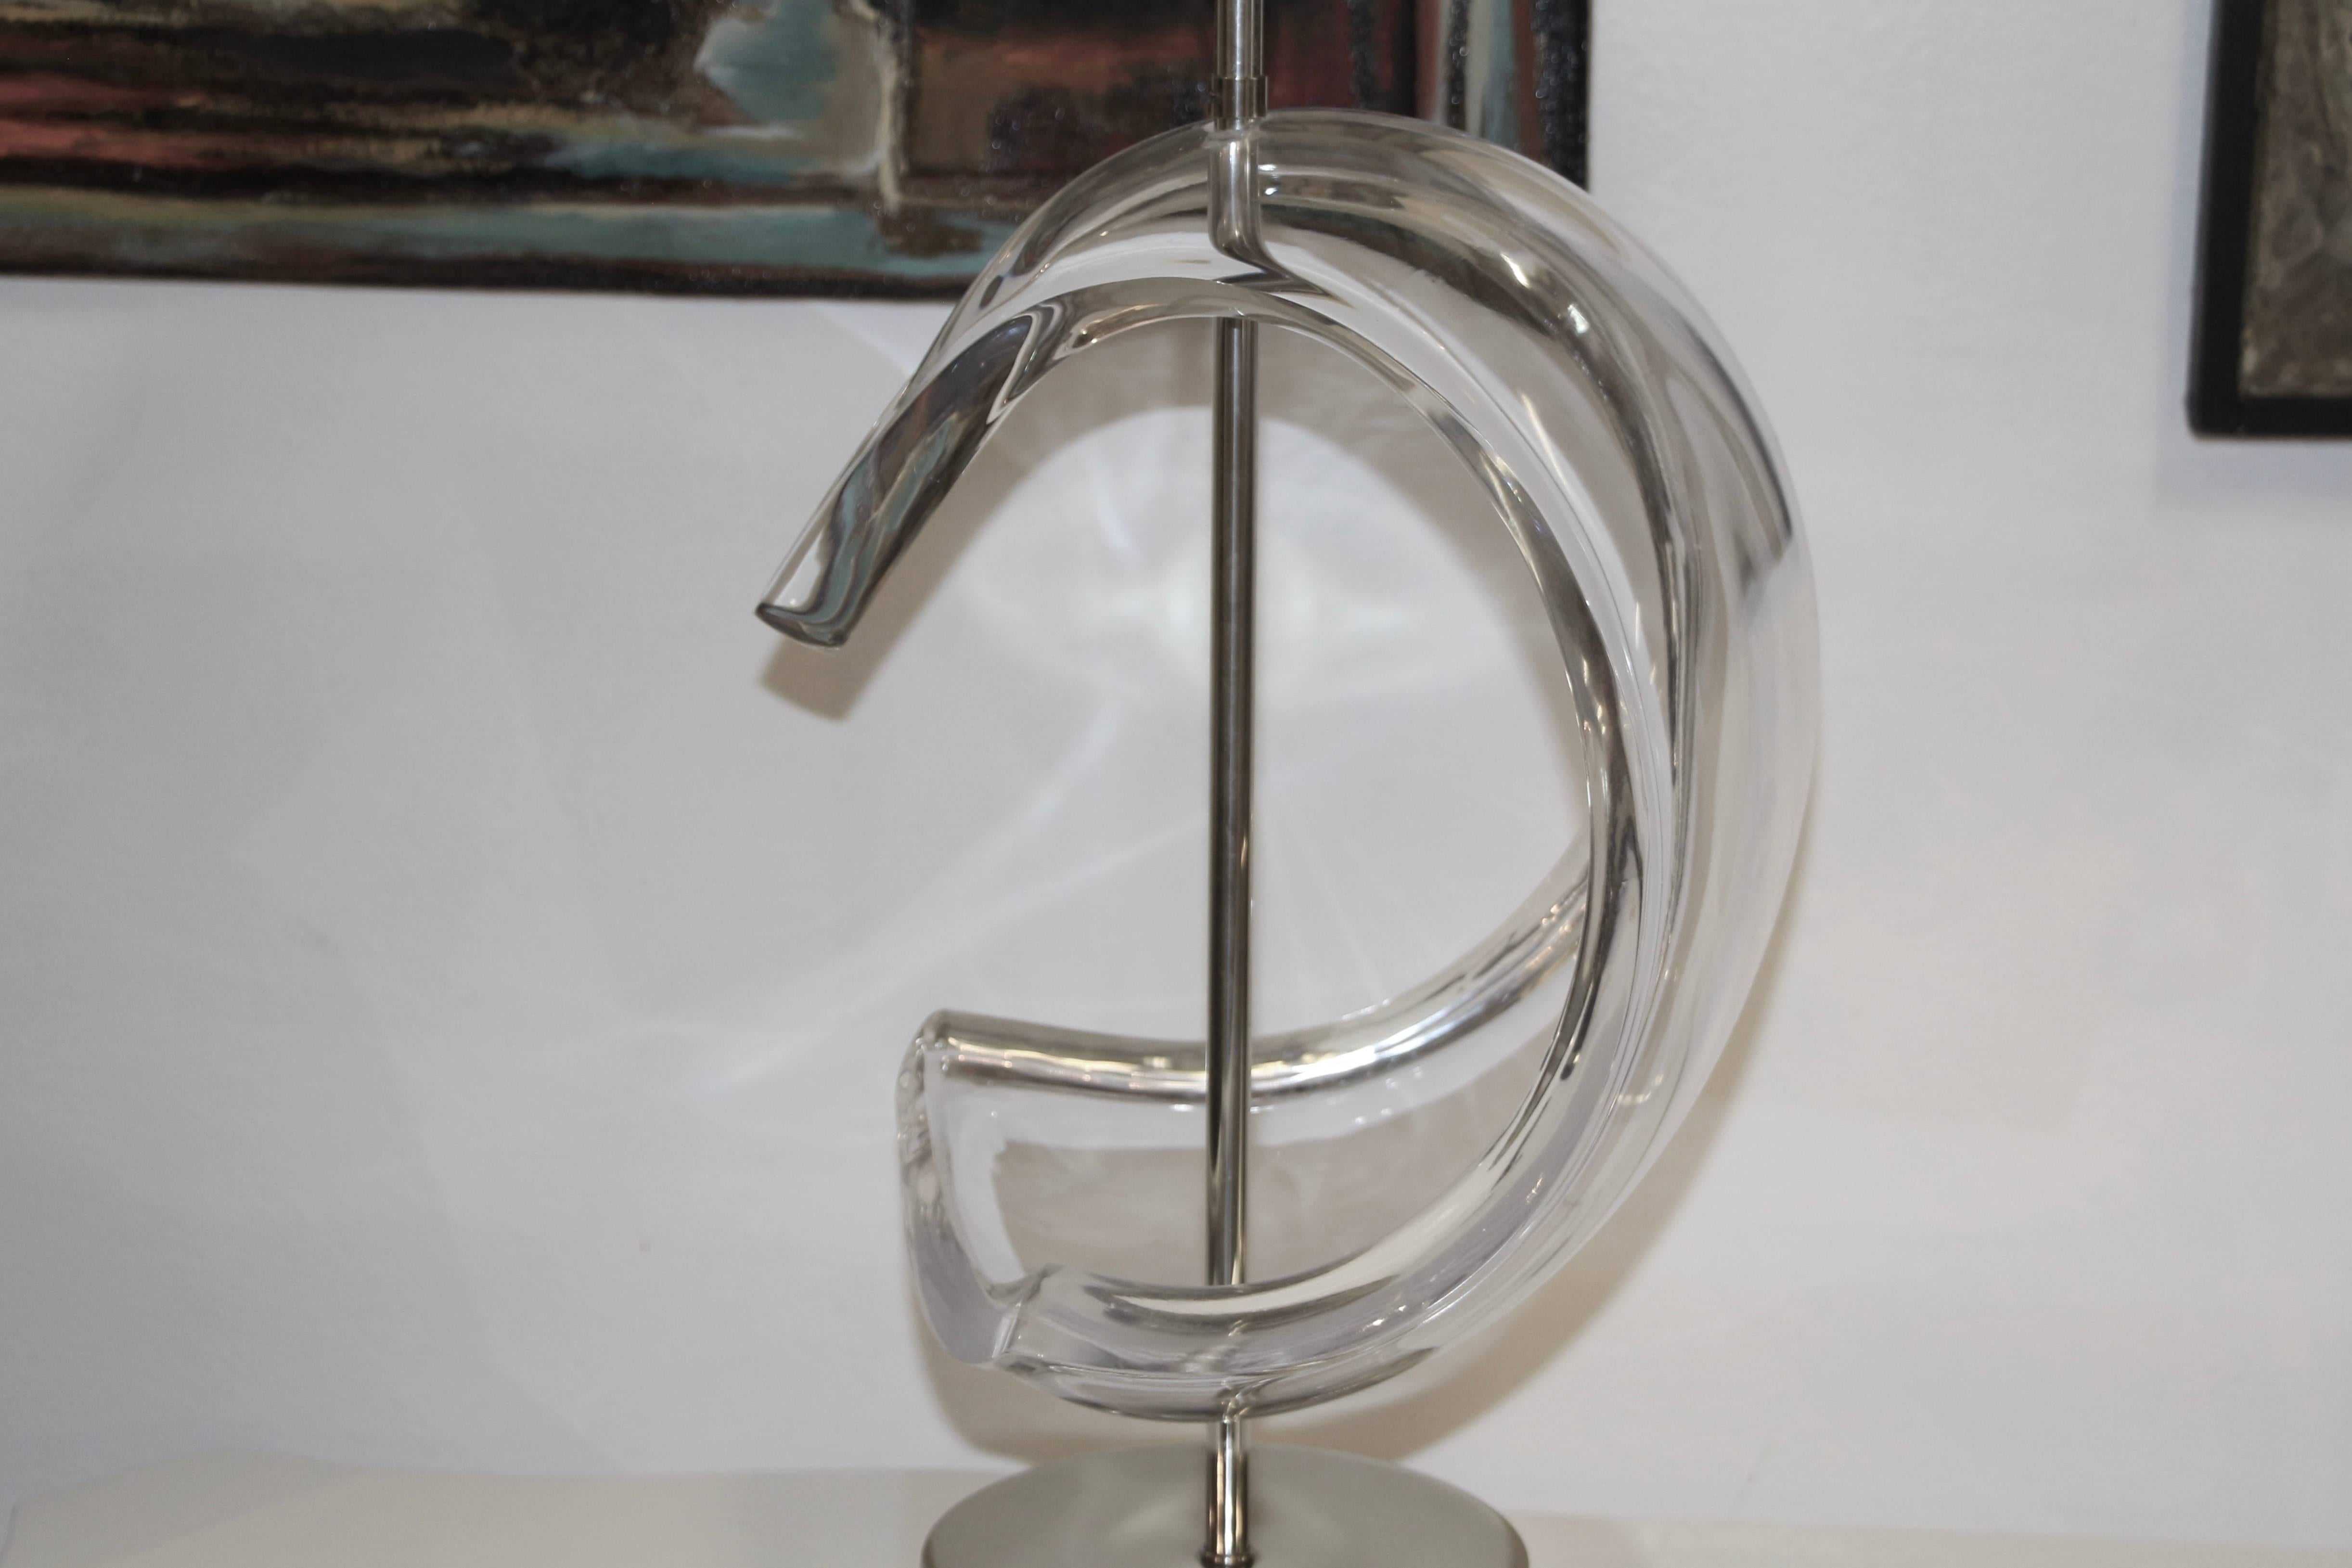 A nice Astrolite Ritts co Lucite lamp from the 1970s. On a cast metal base. It is in working condition, although the shade should be replaced. Some minor marks to the Lucite and metal.